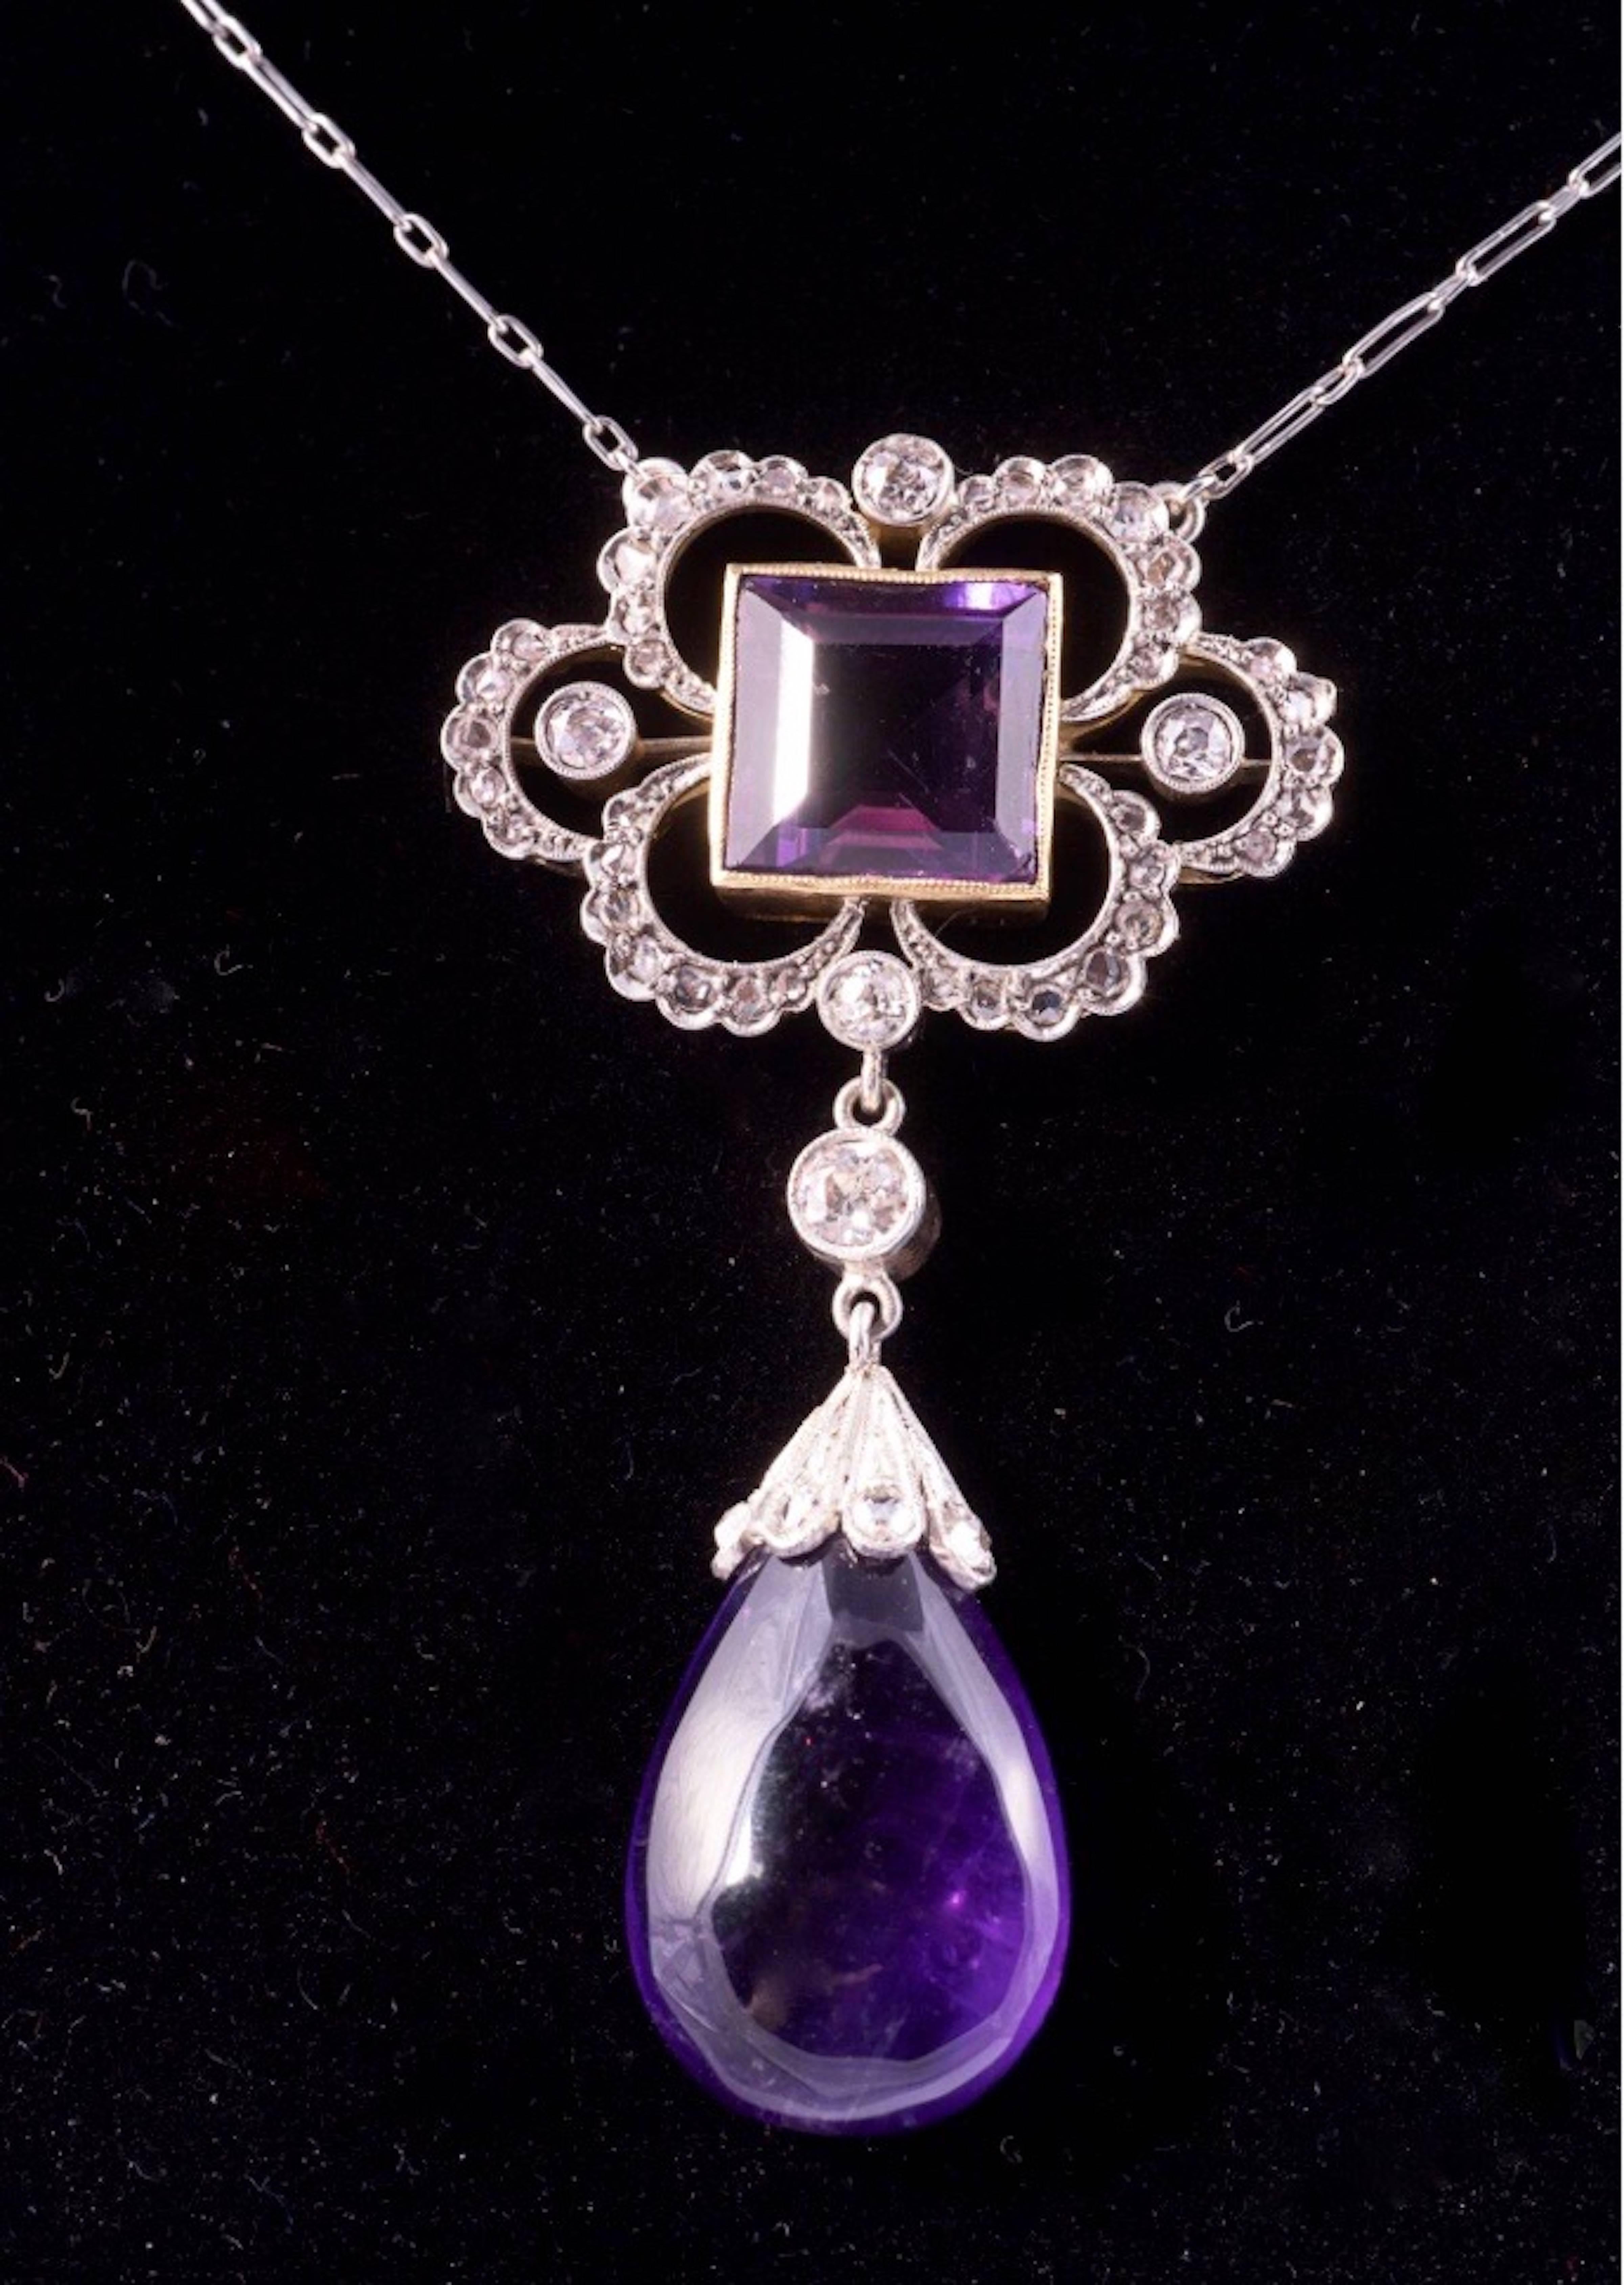 Breathtaking Edwardian Amethyst and Diamond Pendant necklace. The design features a 9.50mm square step cut amethyst and a an approximate 1 inch drop shape amethyst. There is one .20ct diamond, four .10ct diamonds and 42 smaller diamonds in the